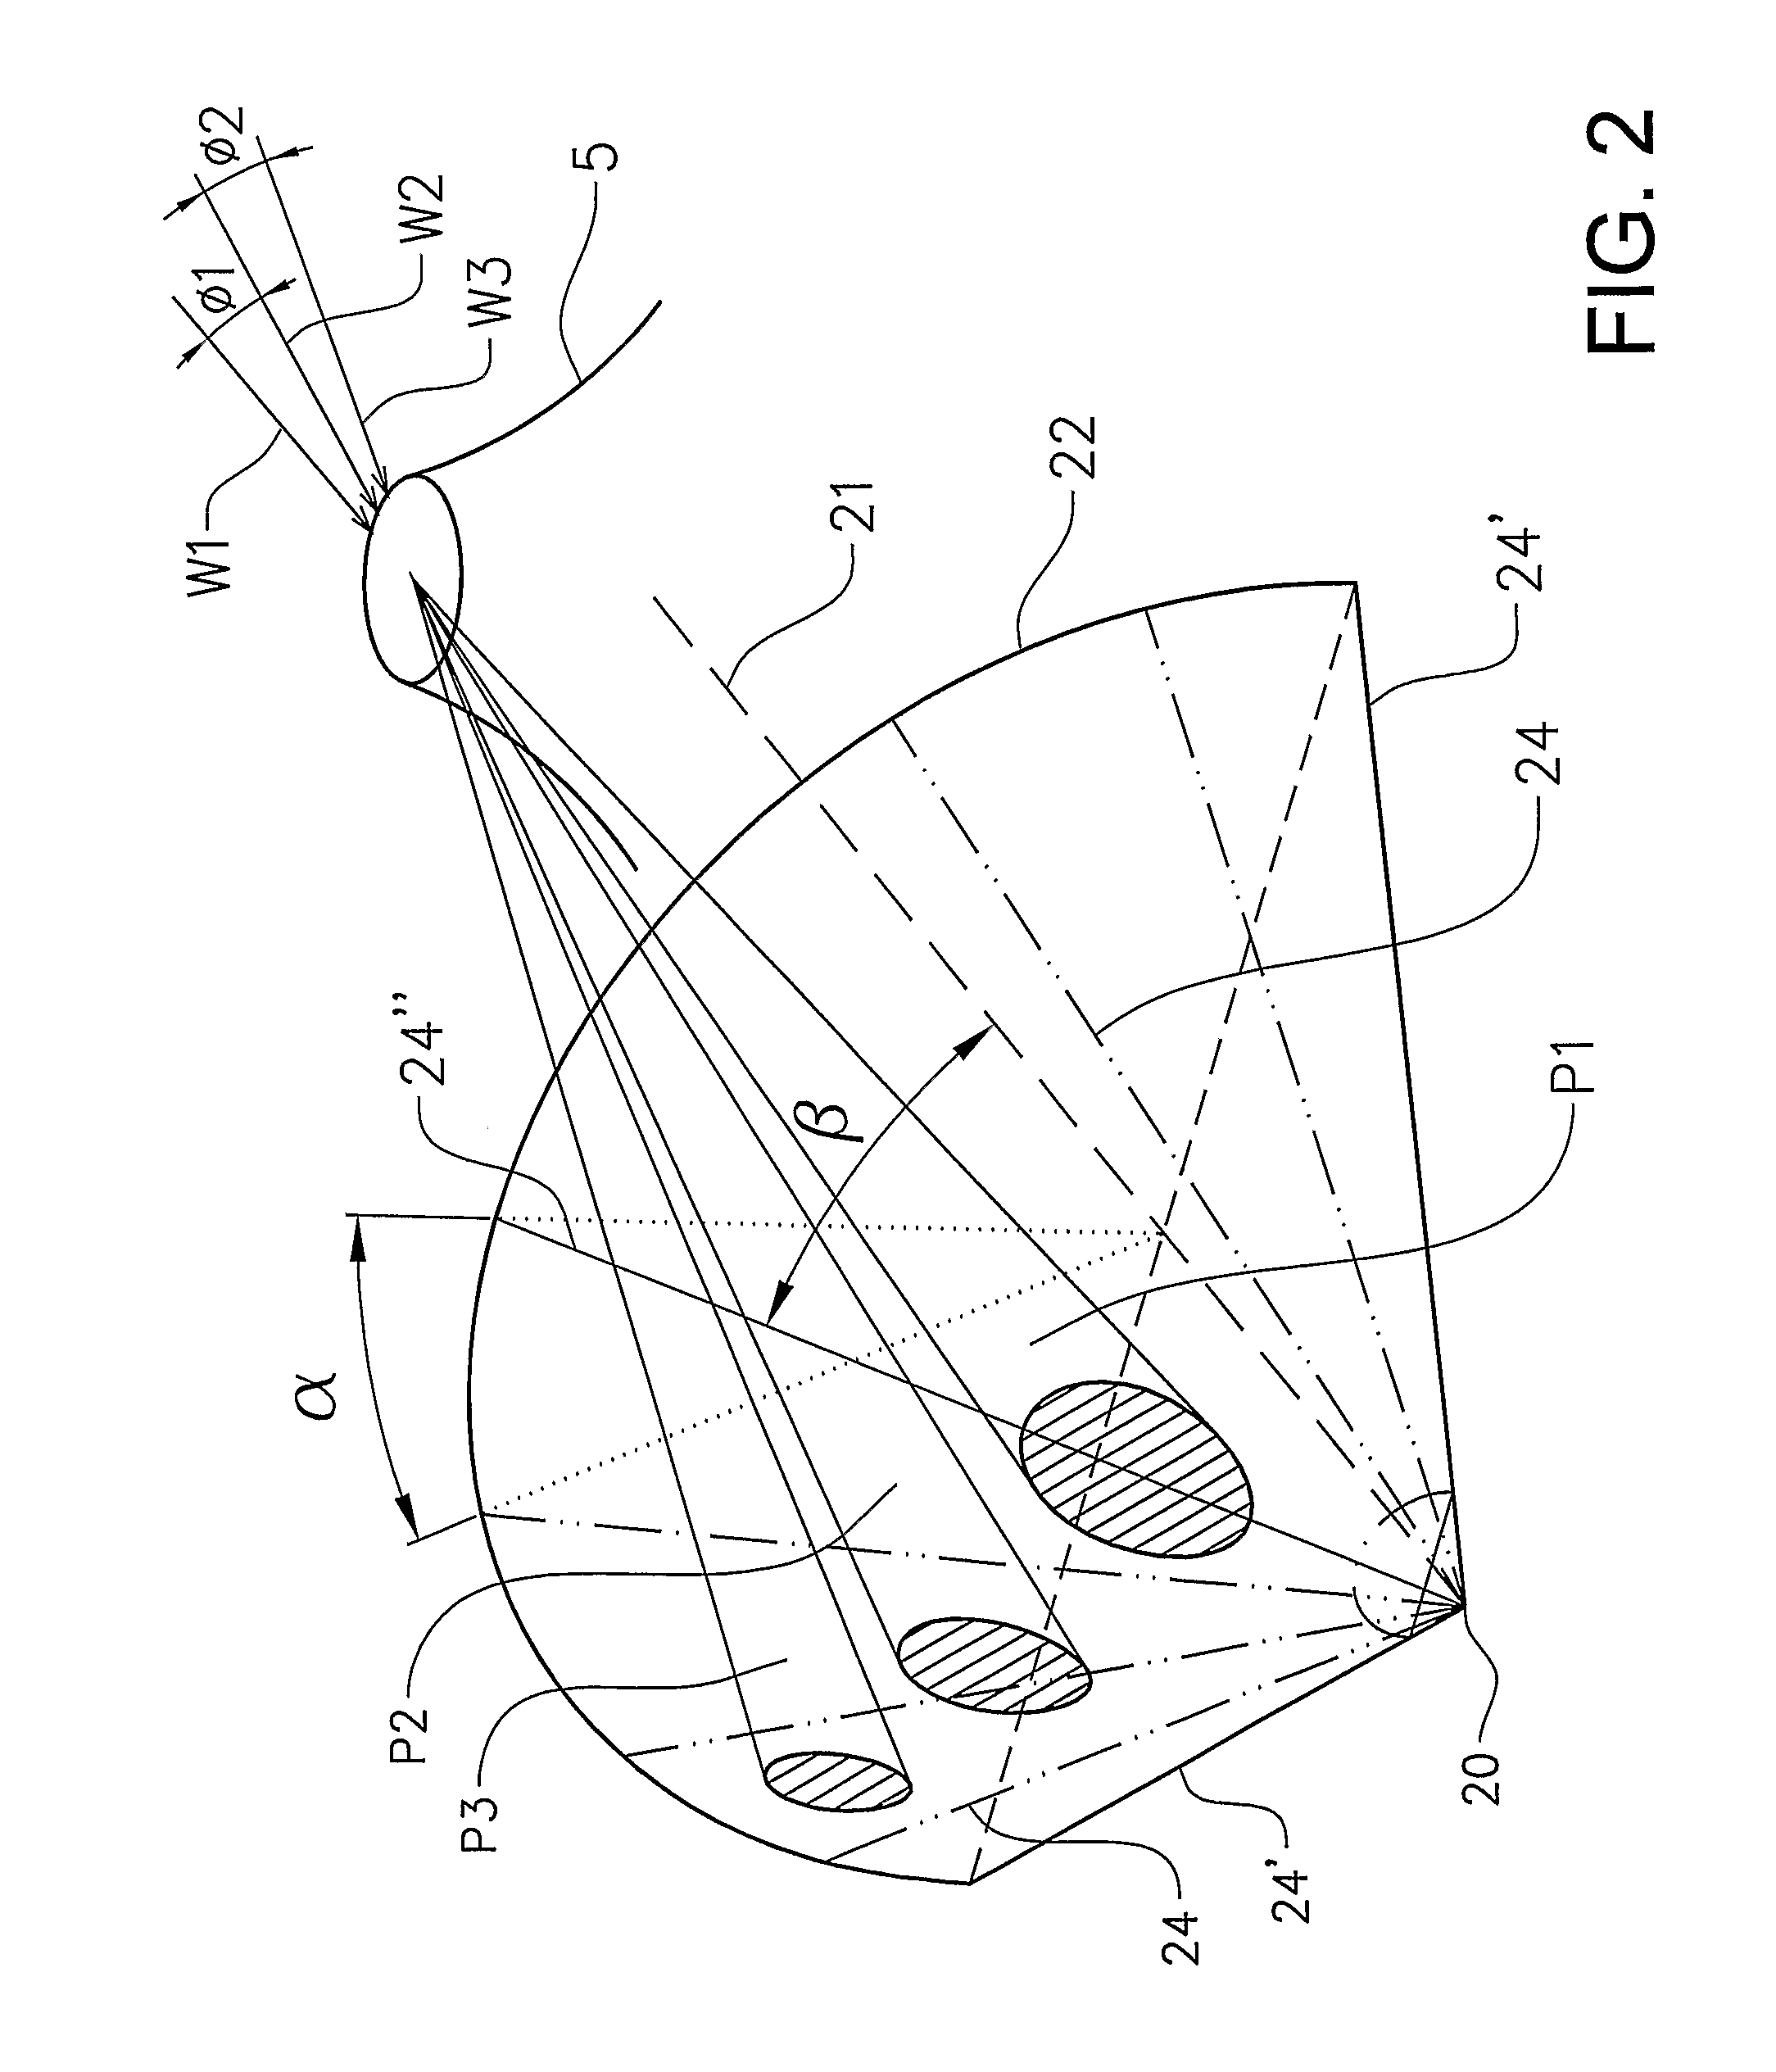 Method and device for measuring emissions of gaseous substances to the atmosphere using scattered sunligt spectroscopy